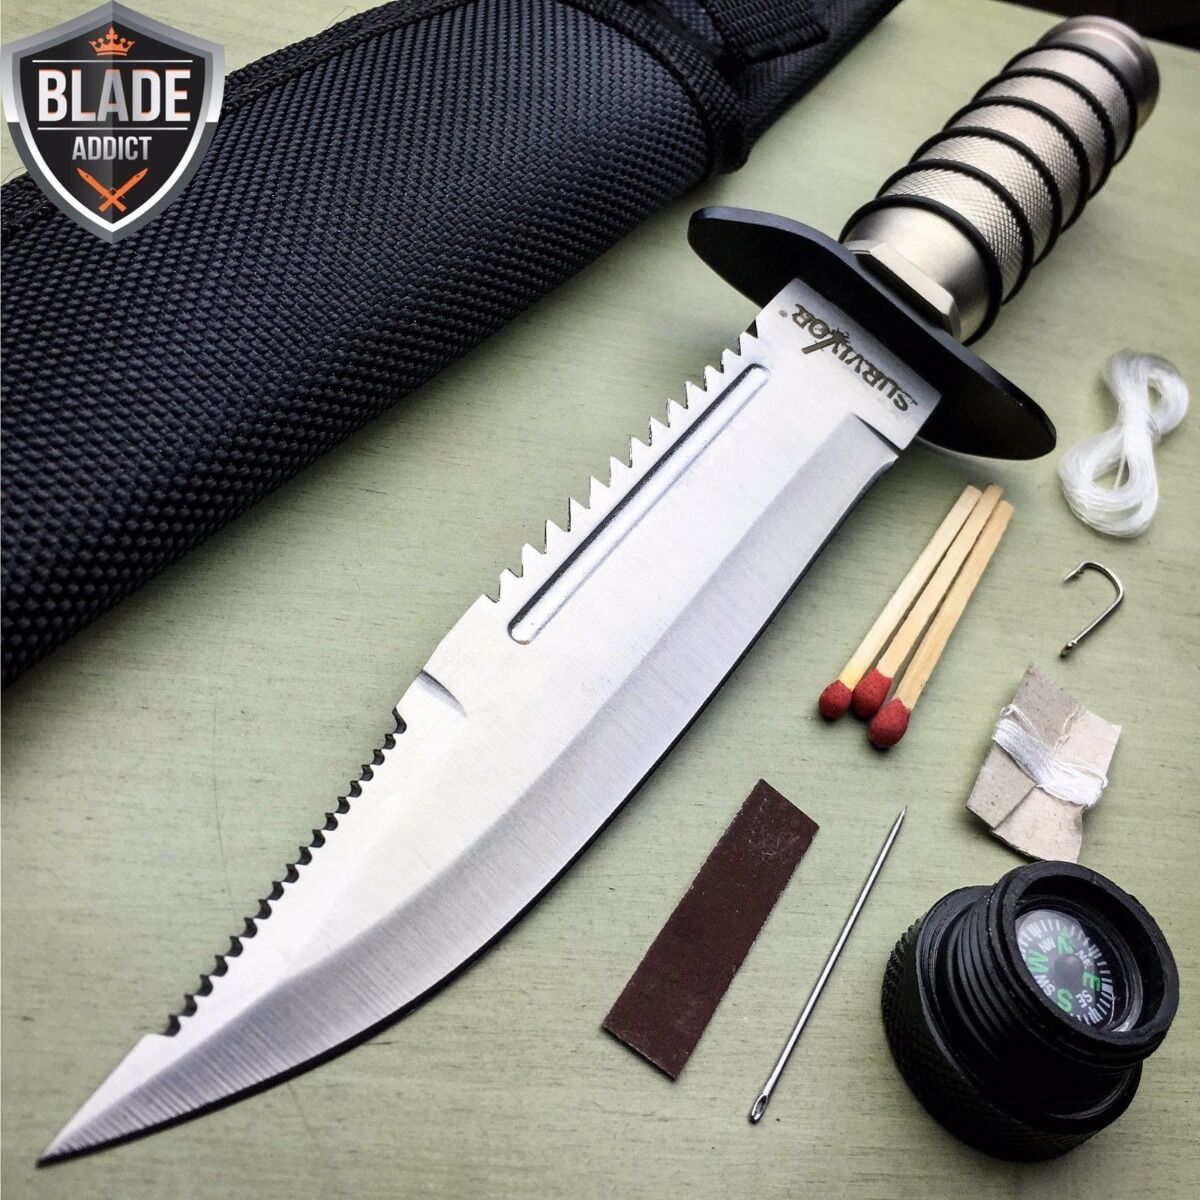 10" Tactical Survival Rambo Hunting Fixed Blade Knife Army Bowie W/ Sheath